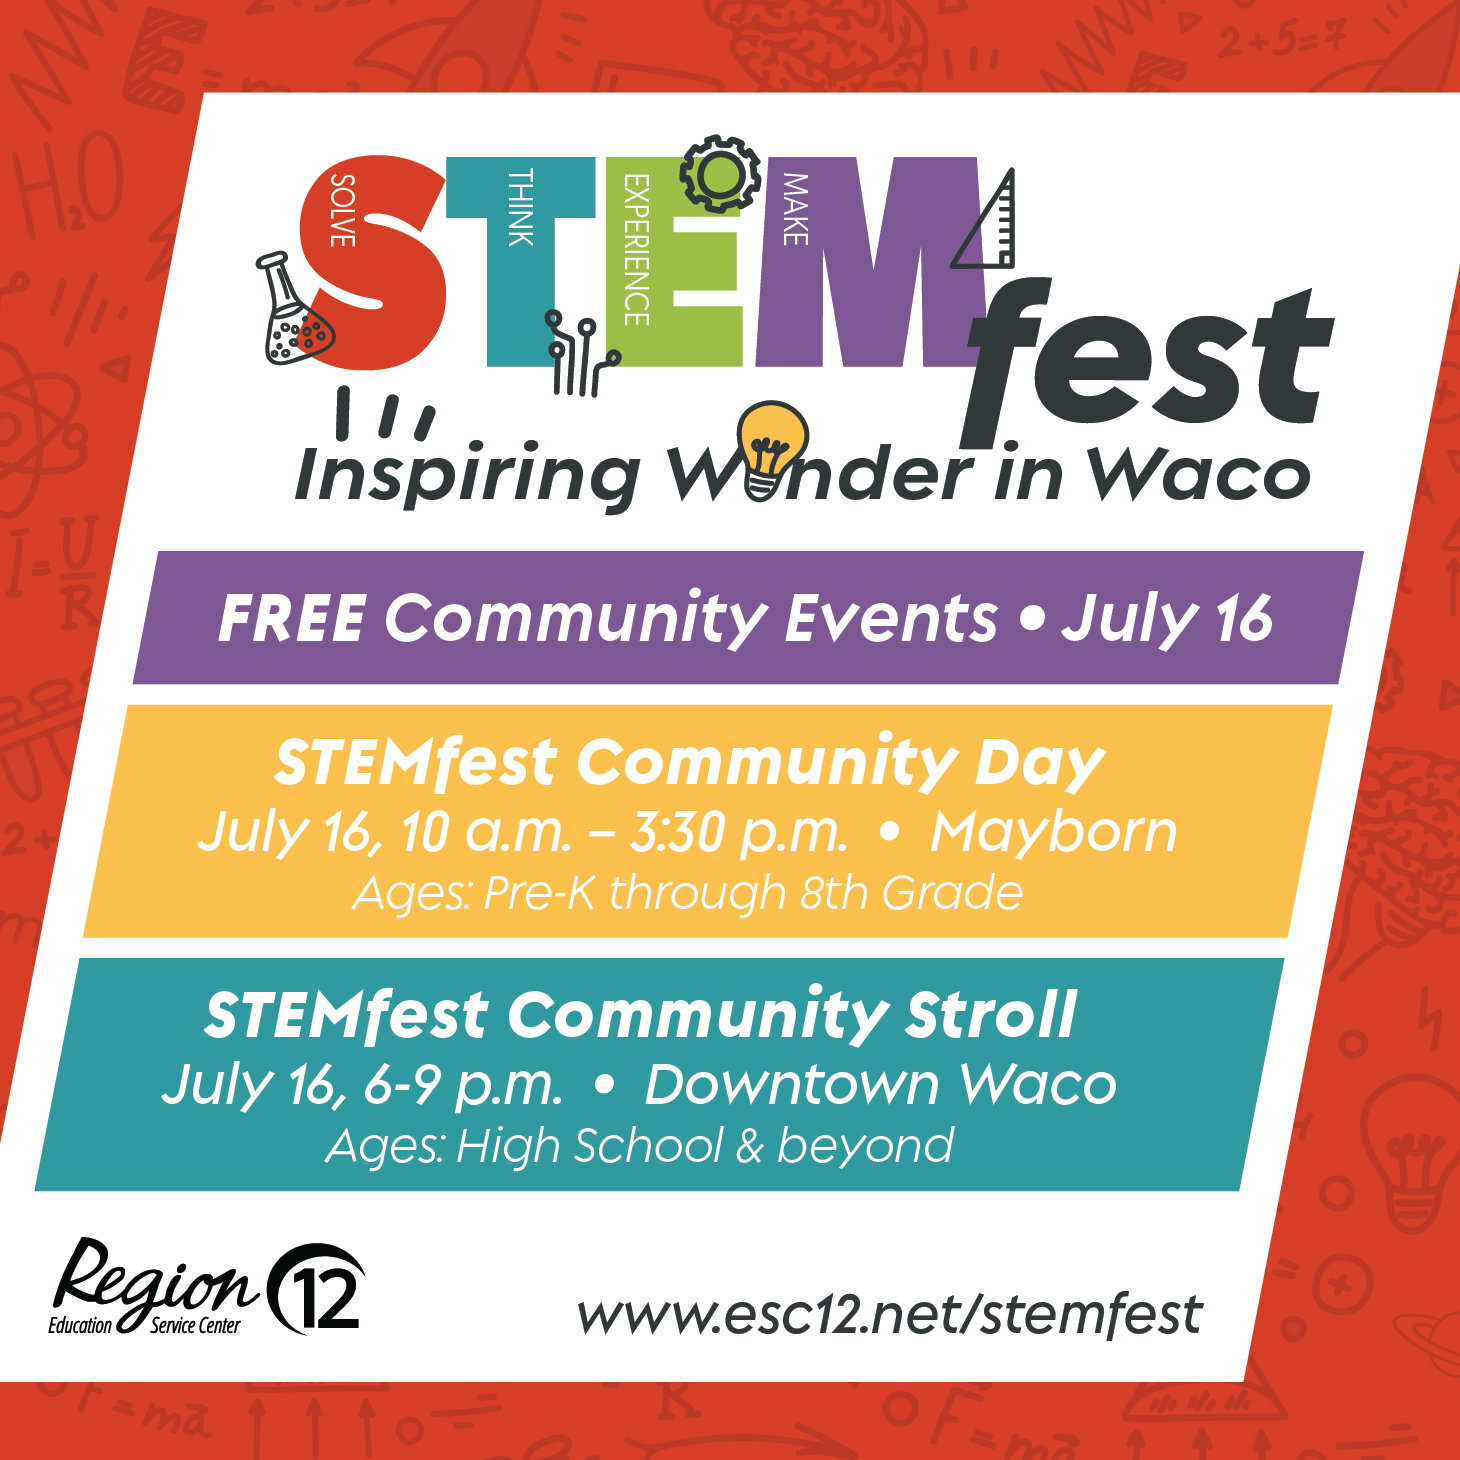 STEMfest Free Community Events, July 16